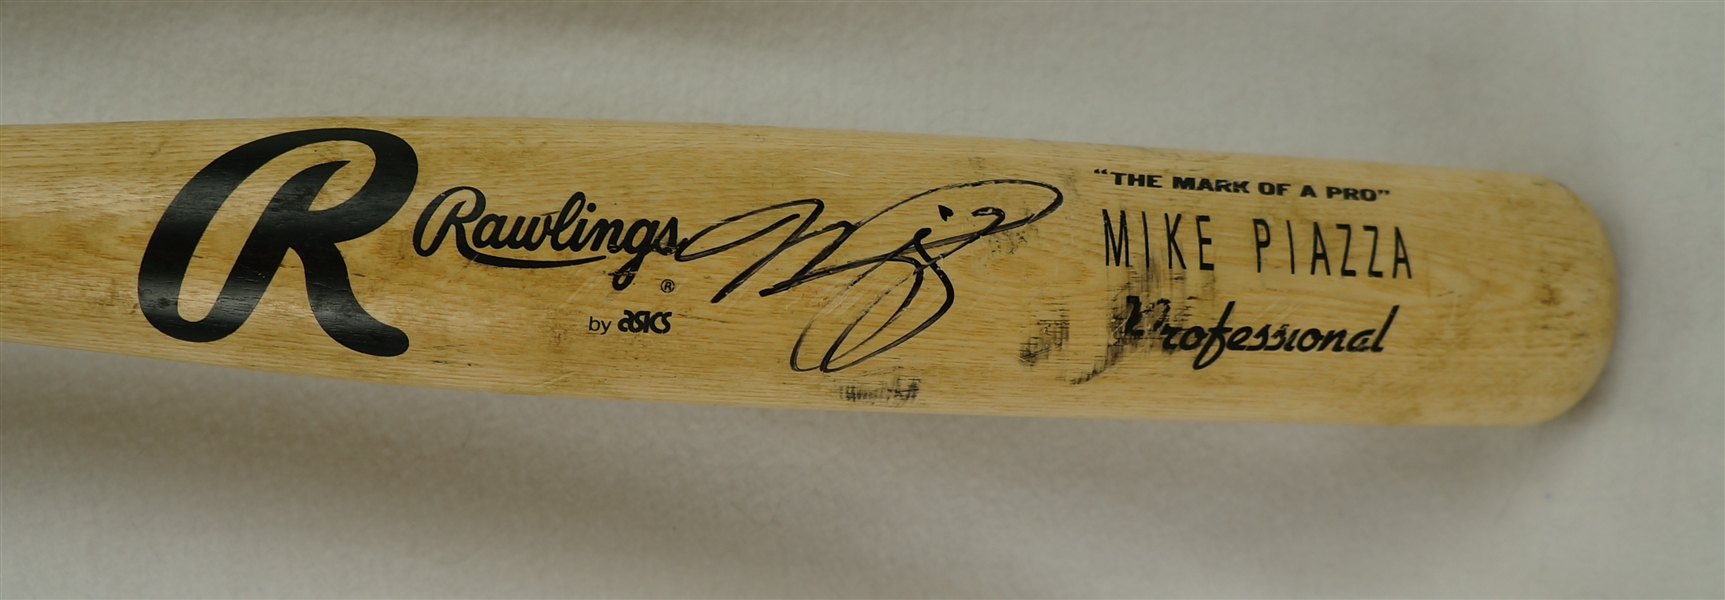 Mike Piazza 1995 Los Angeles Dodgers Professional Model Bat w/Heavy Use